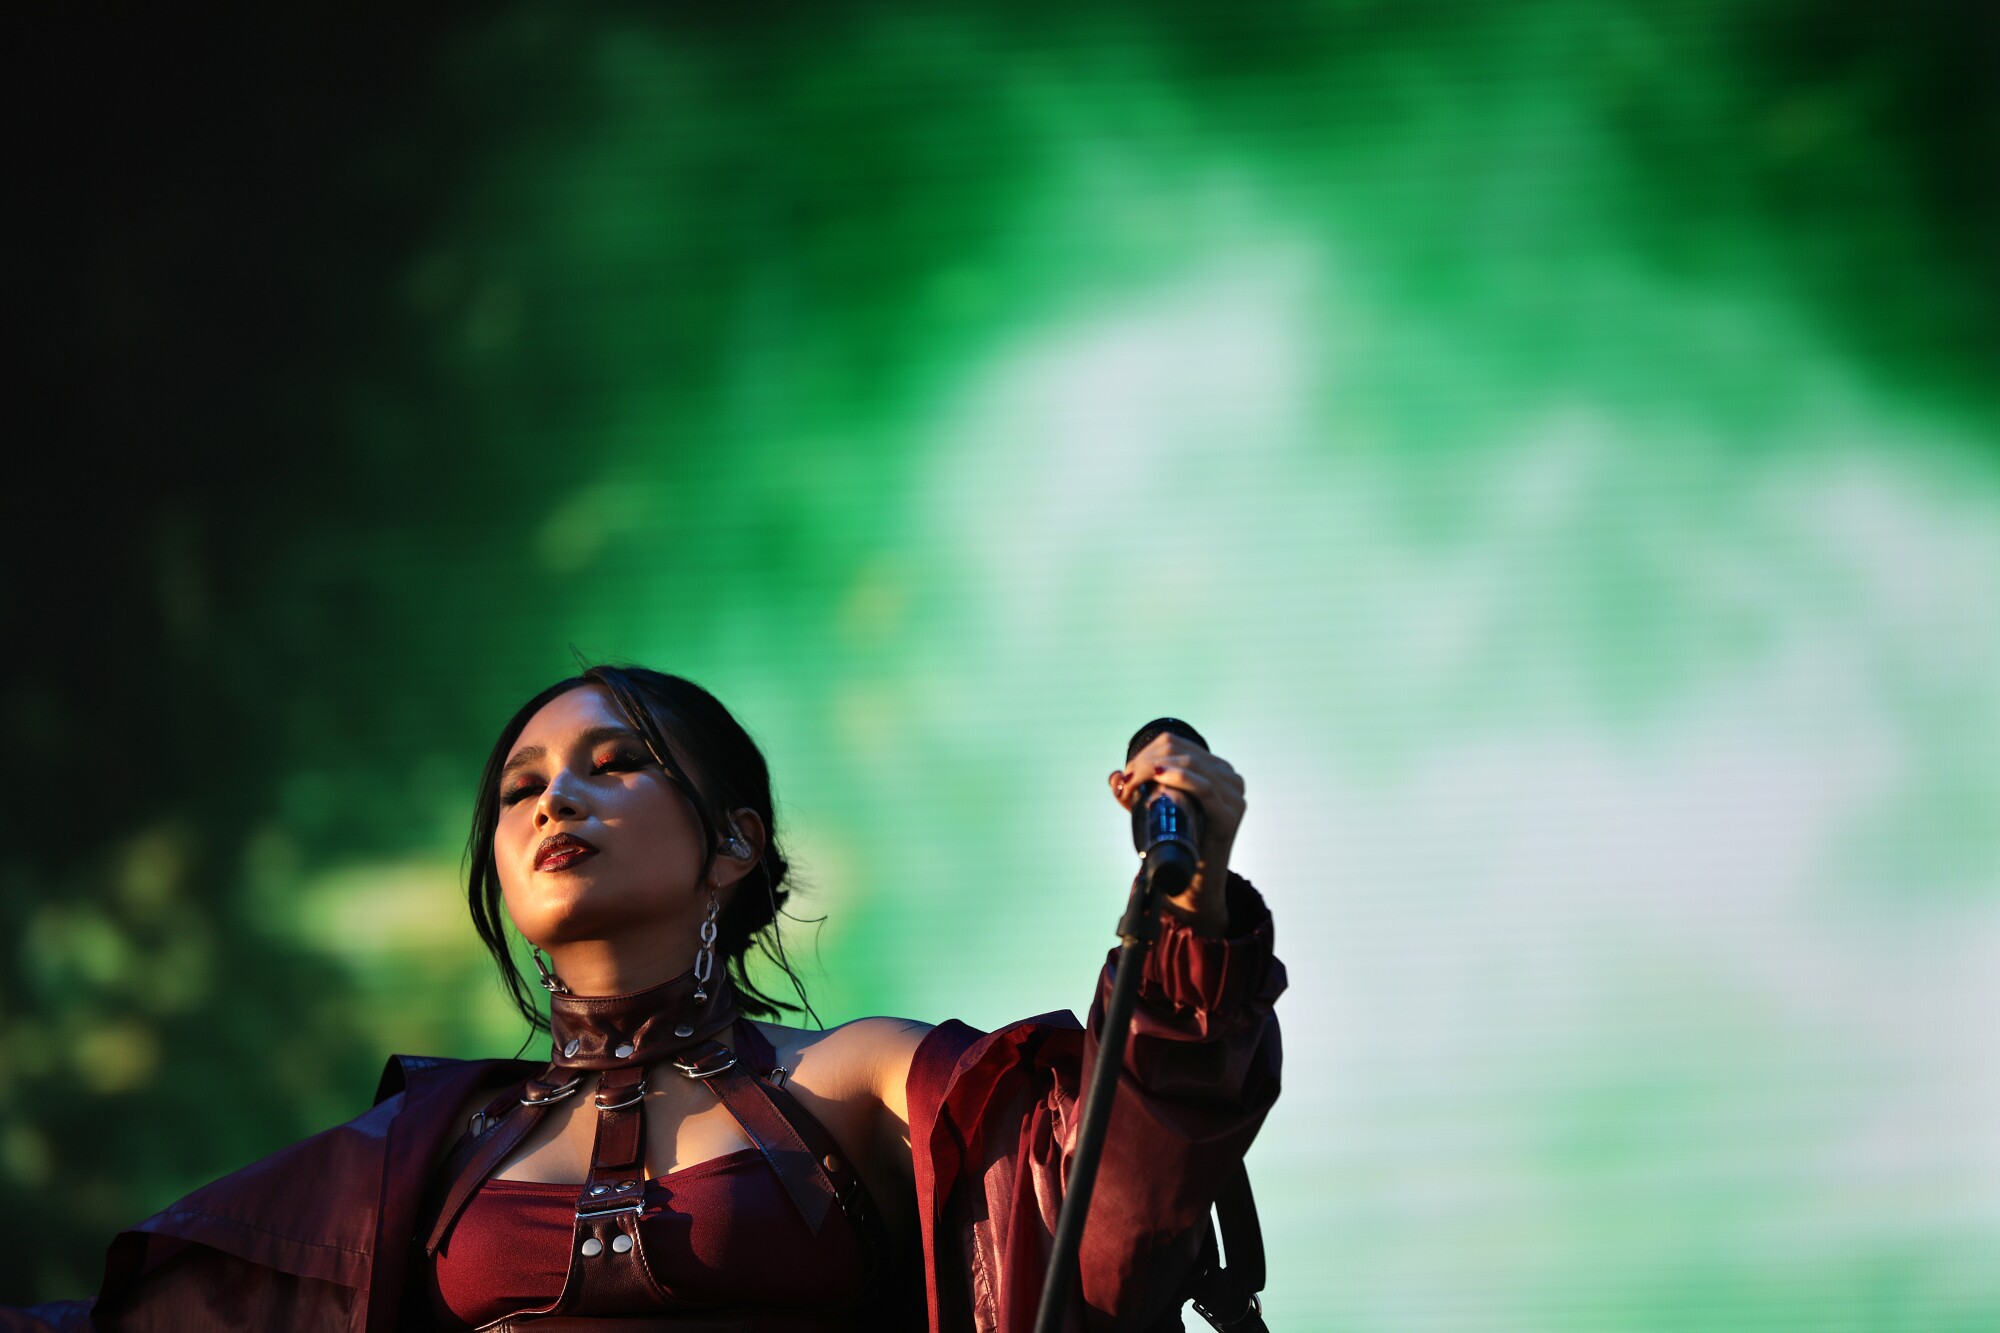 A woman in a red outfit with a leather collar performs.